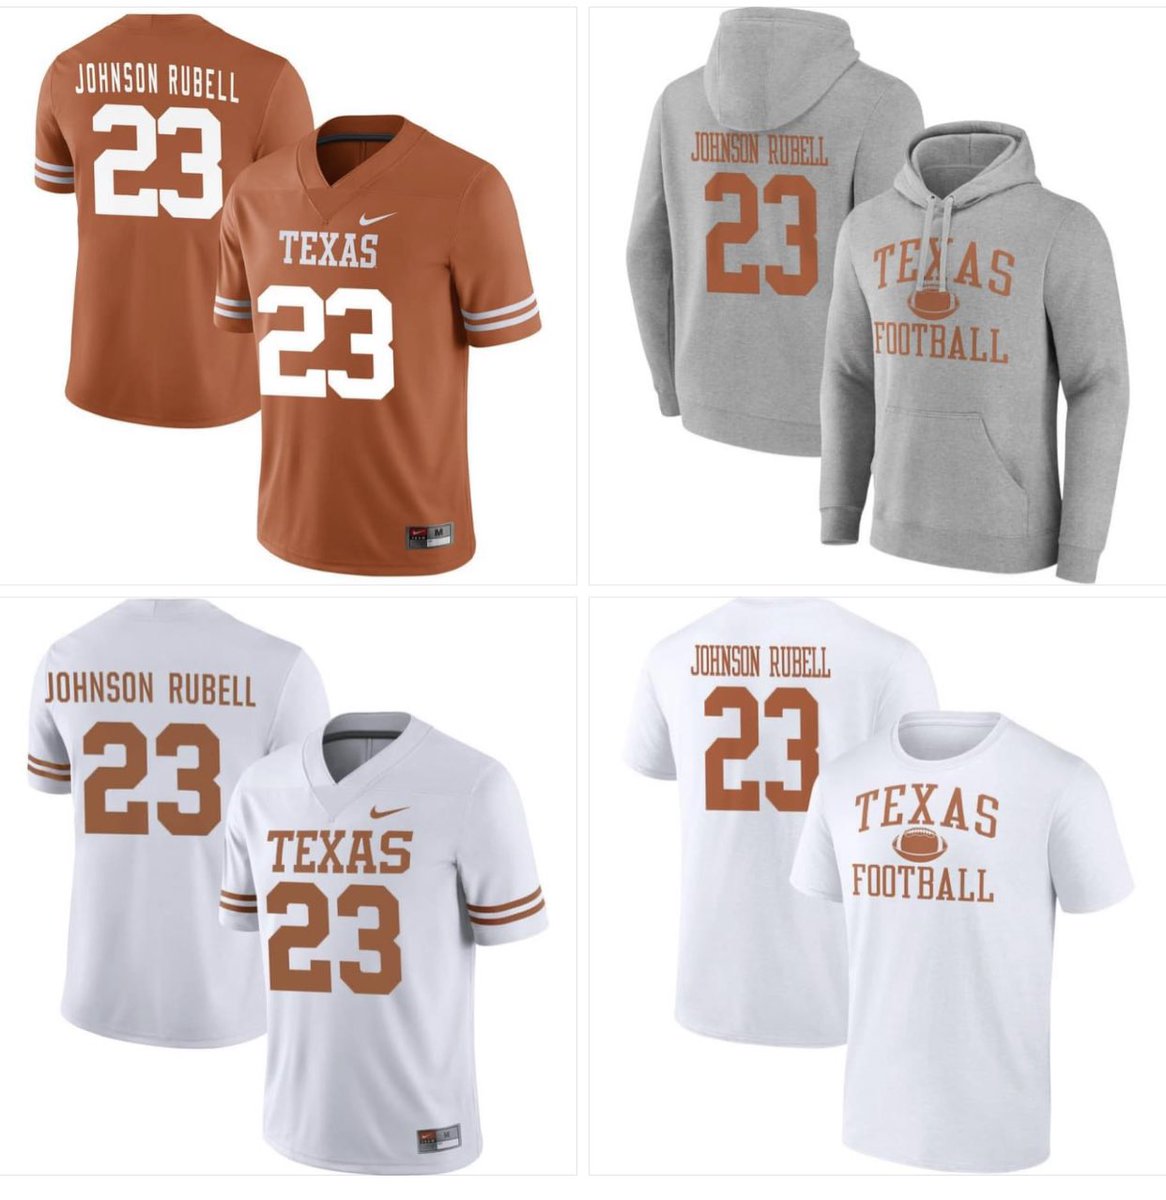 Official Merchandise Drop! Click on the Link to order! I am autographing the first 23 verified purchases! #hookem fanatics.com/?query=Texas%2…